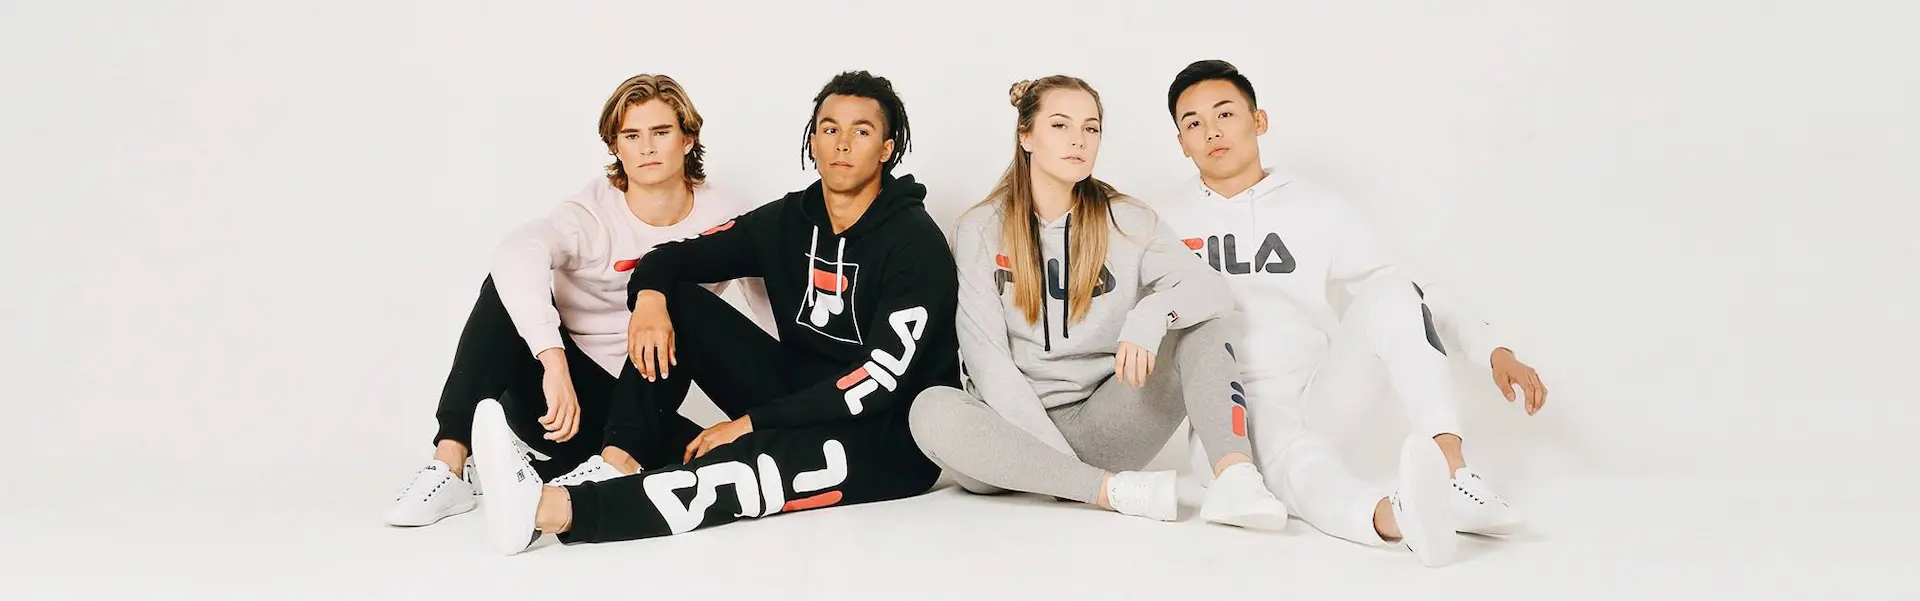 Fila 1-Day sale - Extra $11 OFF selected styles with coupon